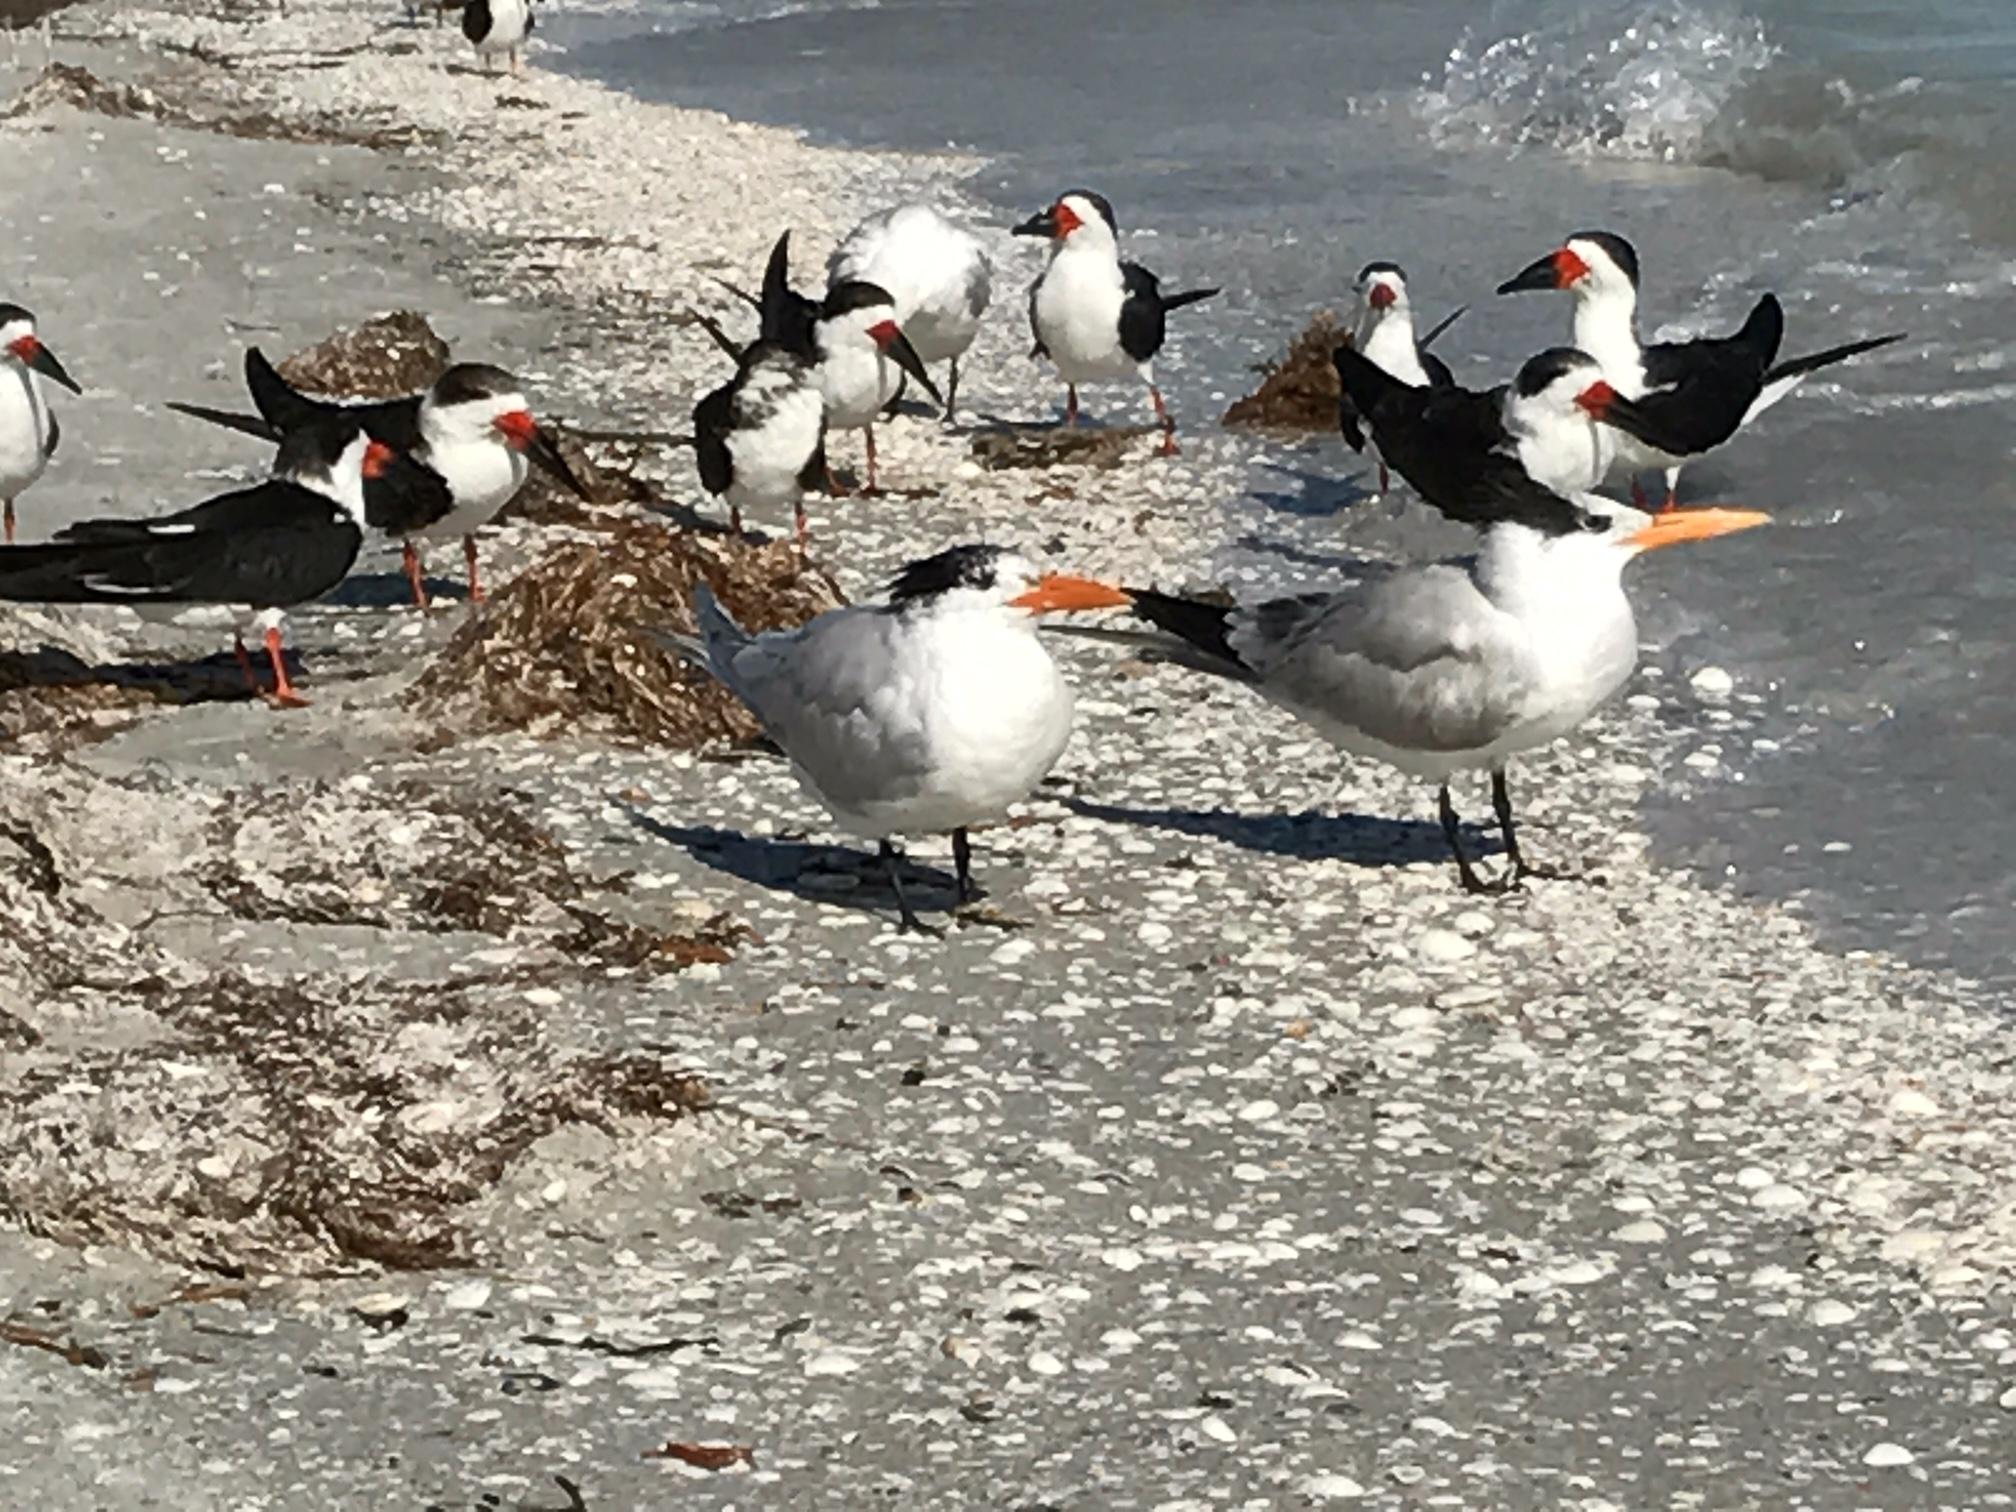 Birds of Sanible Island, Periwinkle Cottages